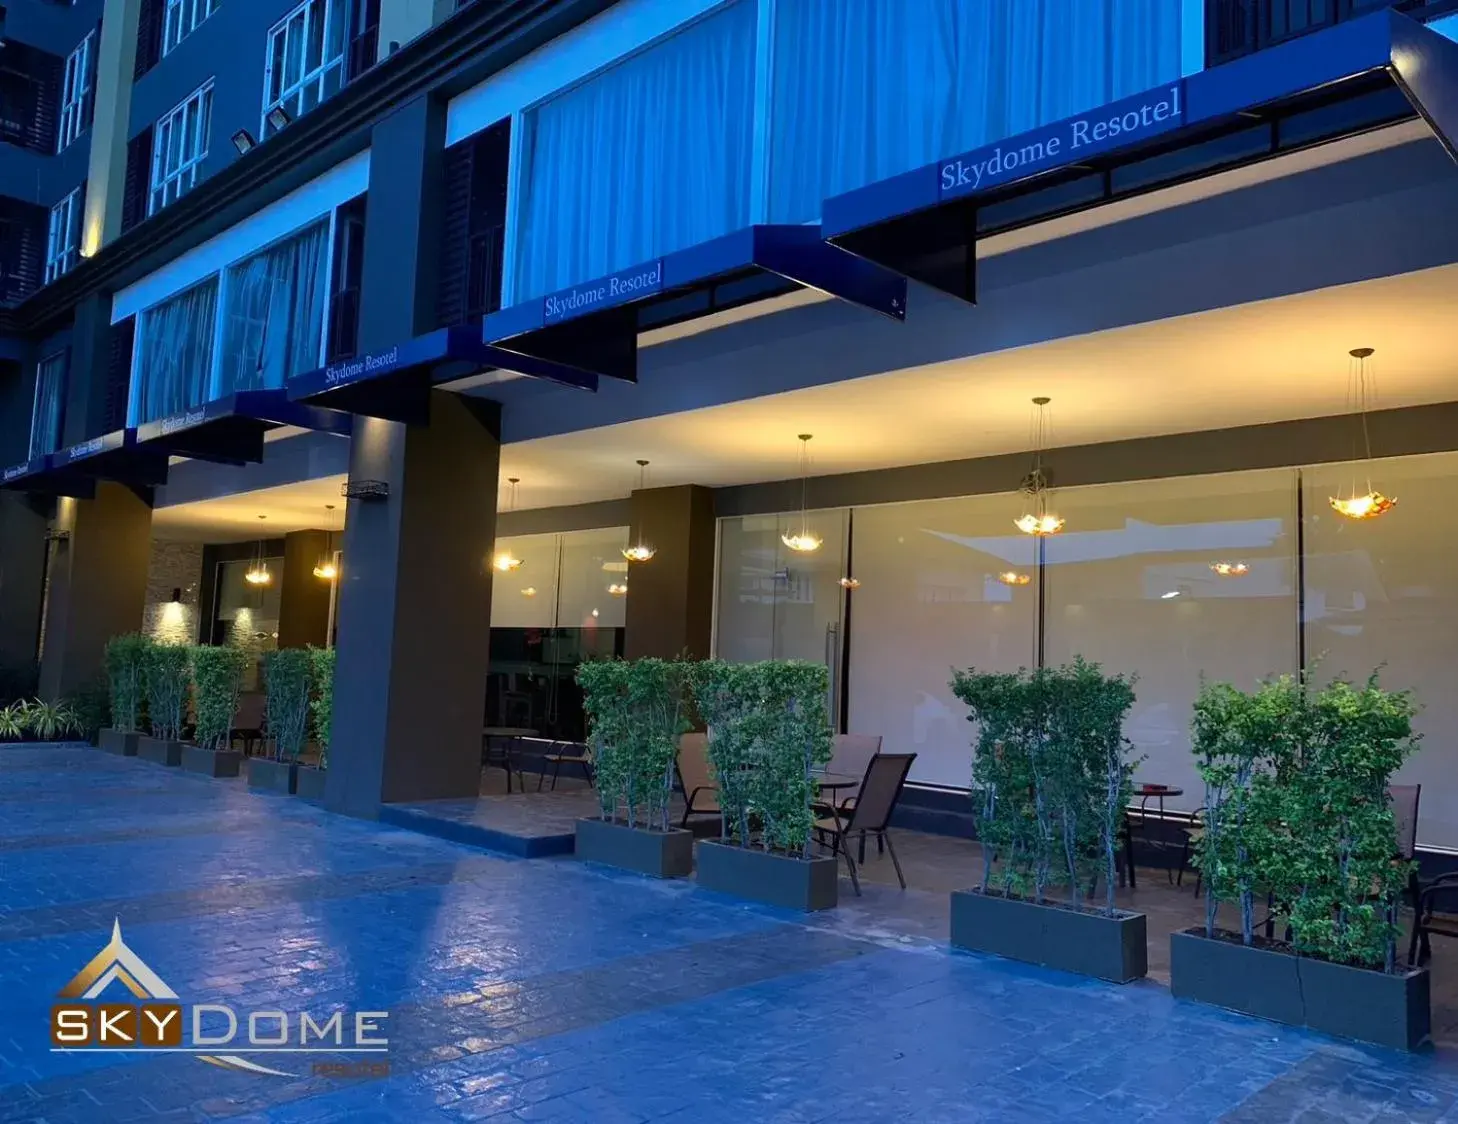 Property building, Swimming Pool in Sky Dome Resotel